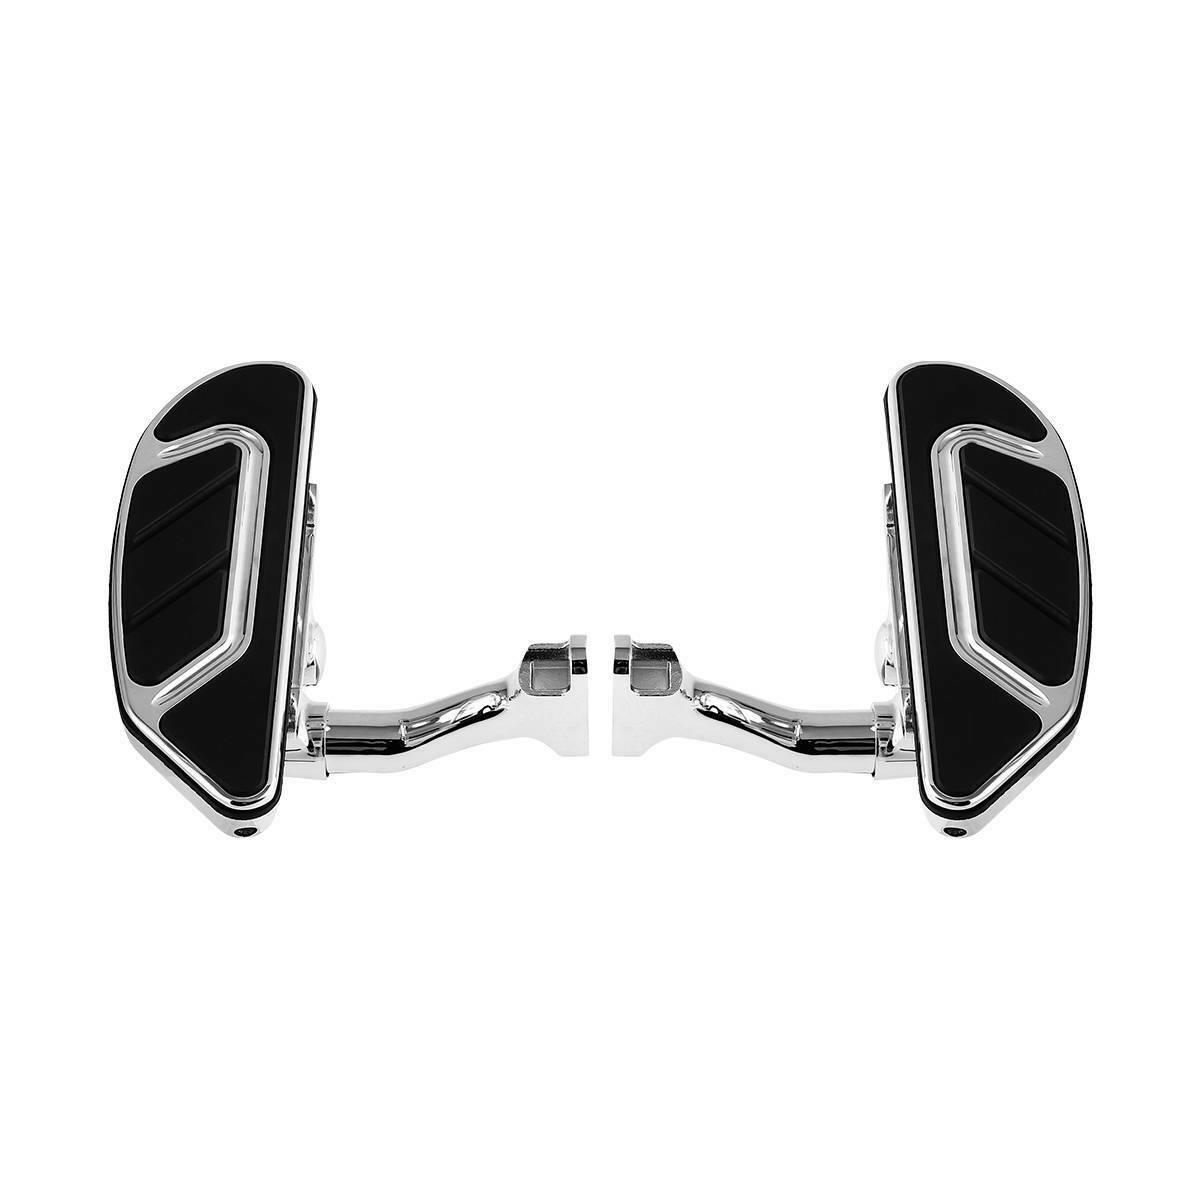 Rear Airflow Floorboard Footboard Bracket Set Fit For Harley CVO Road Glide King - Moto Life Products